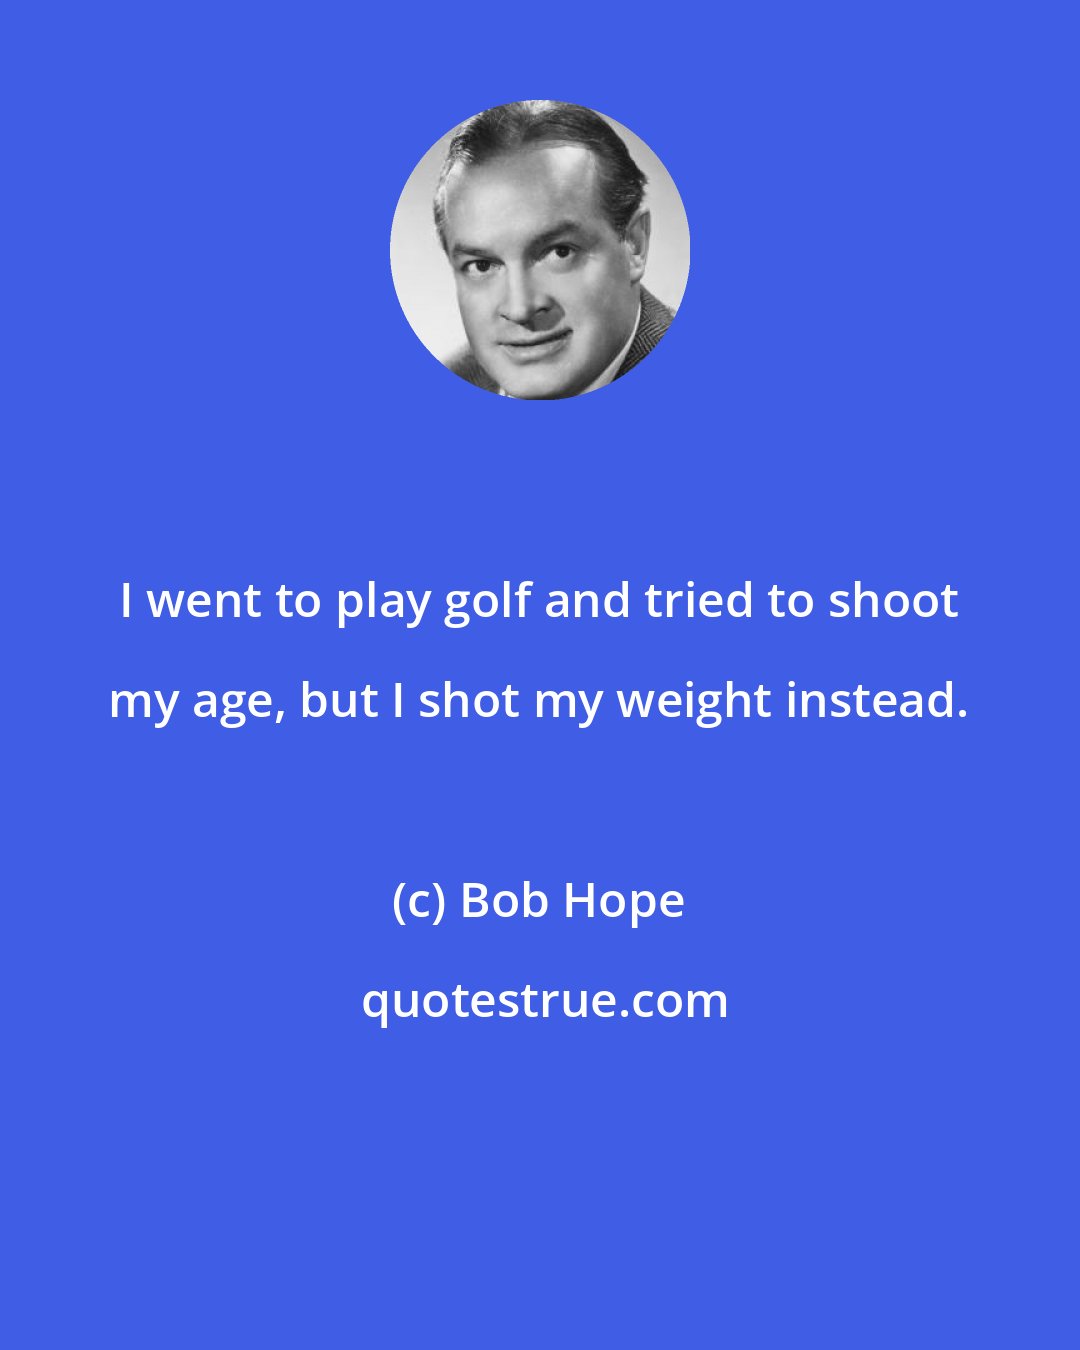 Bob Hope: I went to play golf and tried to shoot my age, but I shot my weight instead.